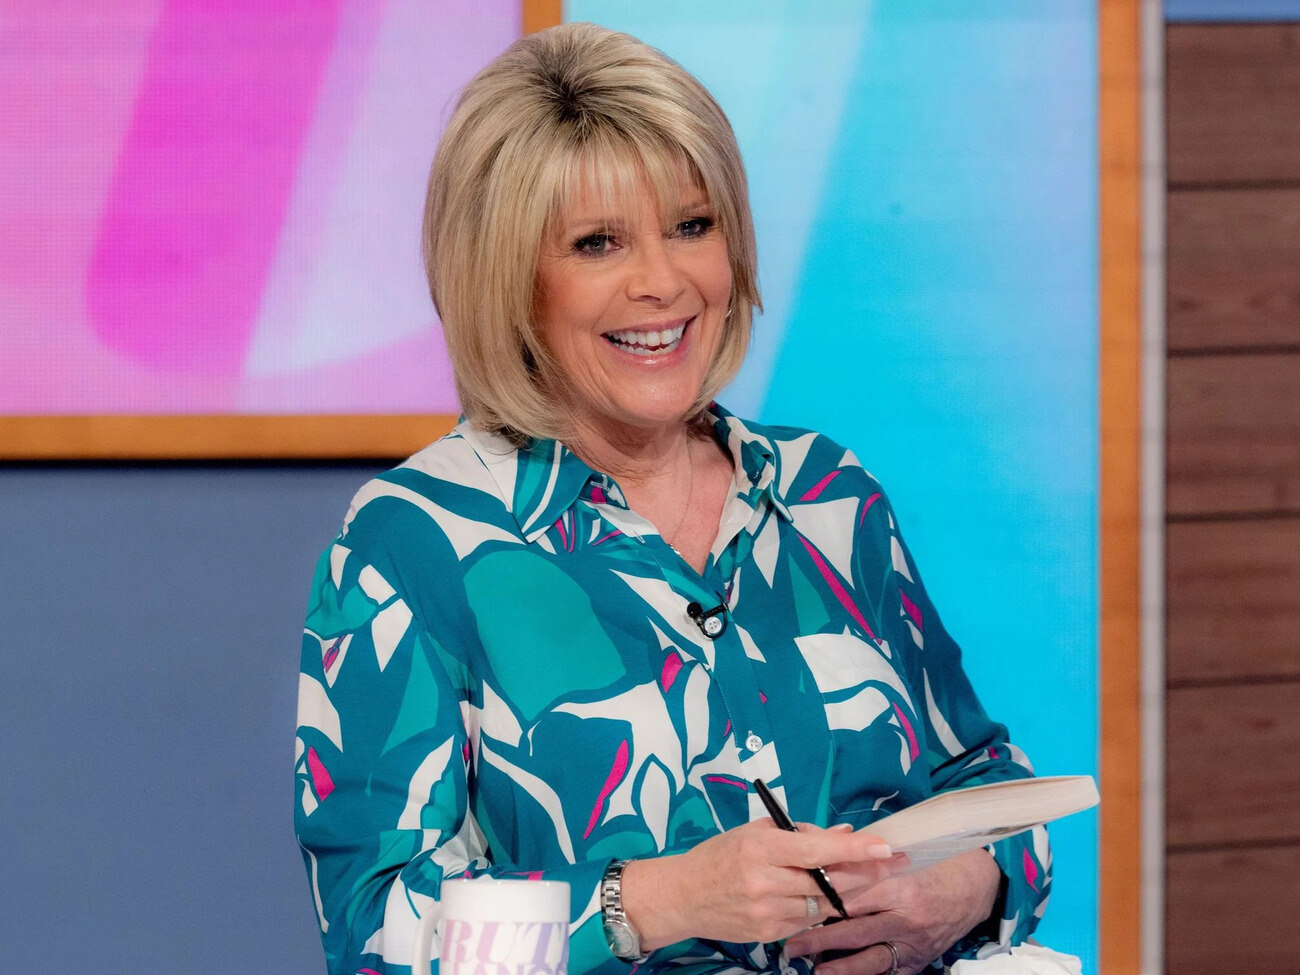 11 Intriguing Facts About Ruth Langsford - Facts.net